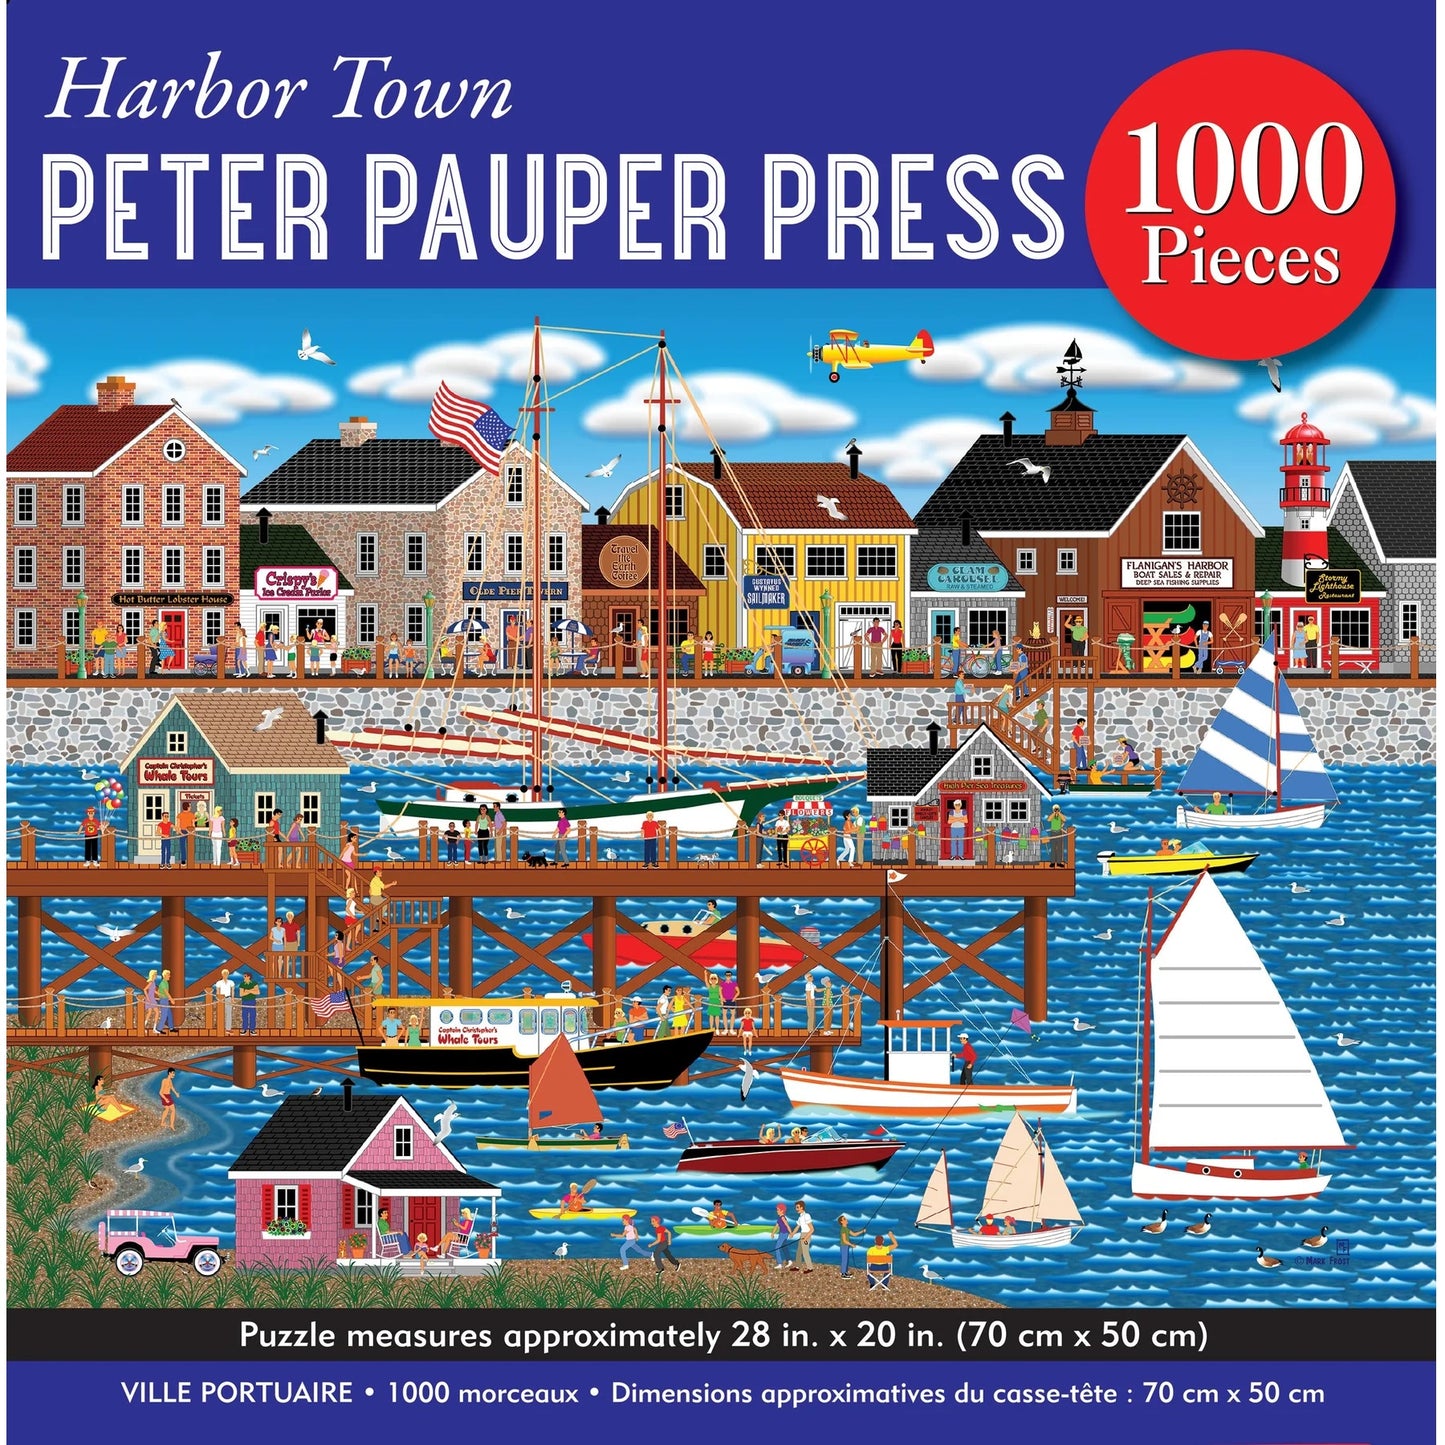 PPP Puzzle Harbor Town 1000PC